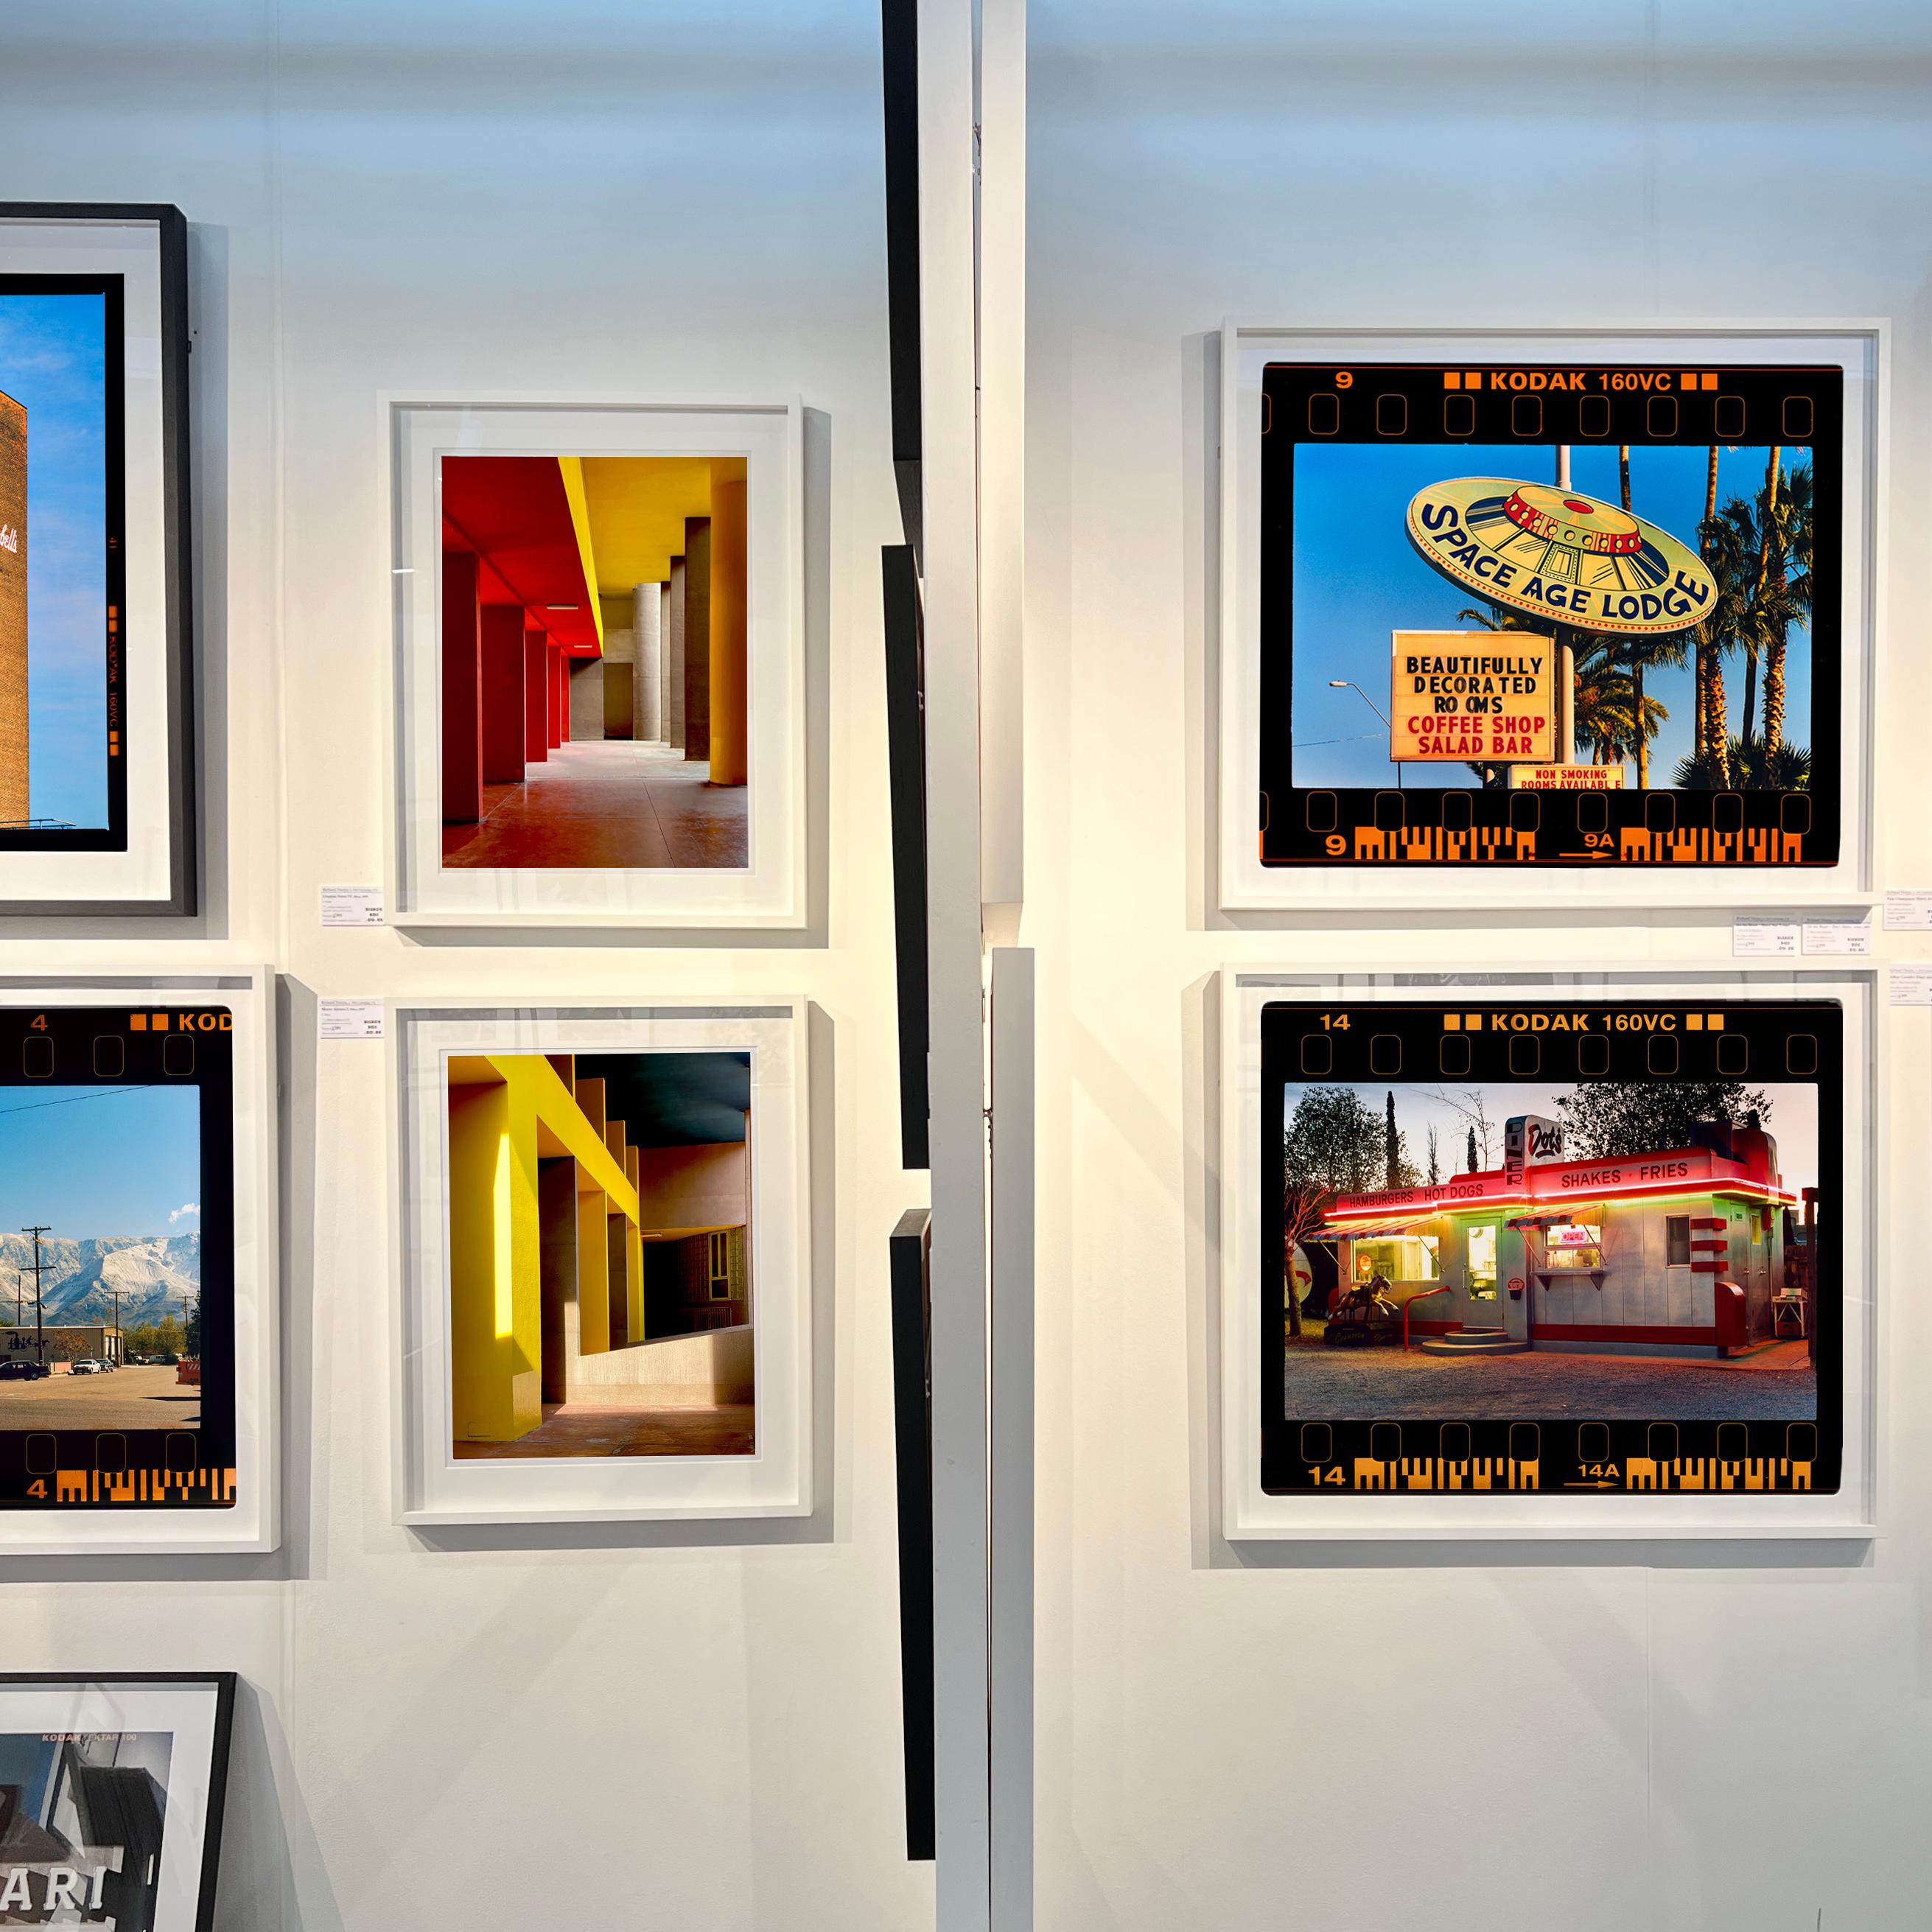 On the Road, reimagines classic Richard Heeps artworks presented with full film rebate almost like a blown up contact sheet. 
'Dot's Diner', photograph from Richard Heeps' 'Dream in Colour' series, featuring a classic American Diner in Bisbee,